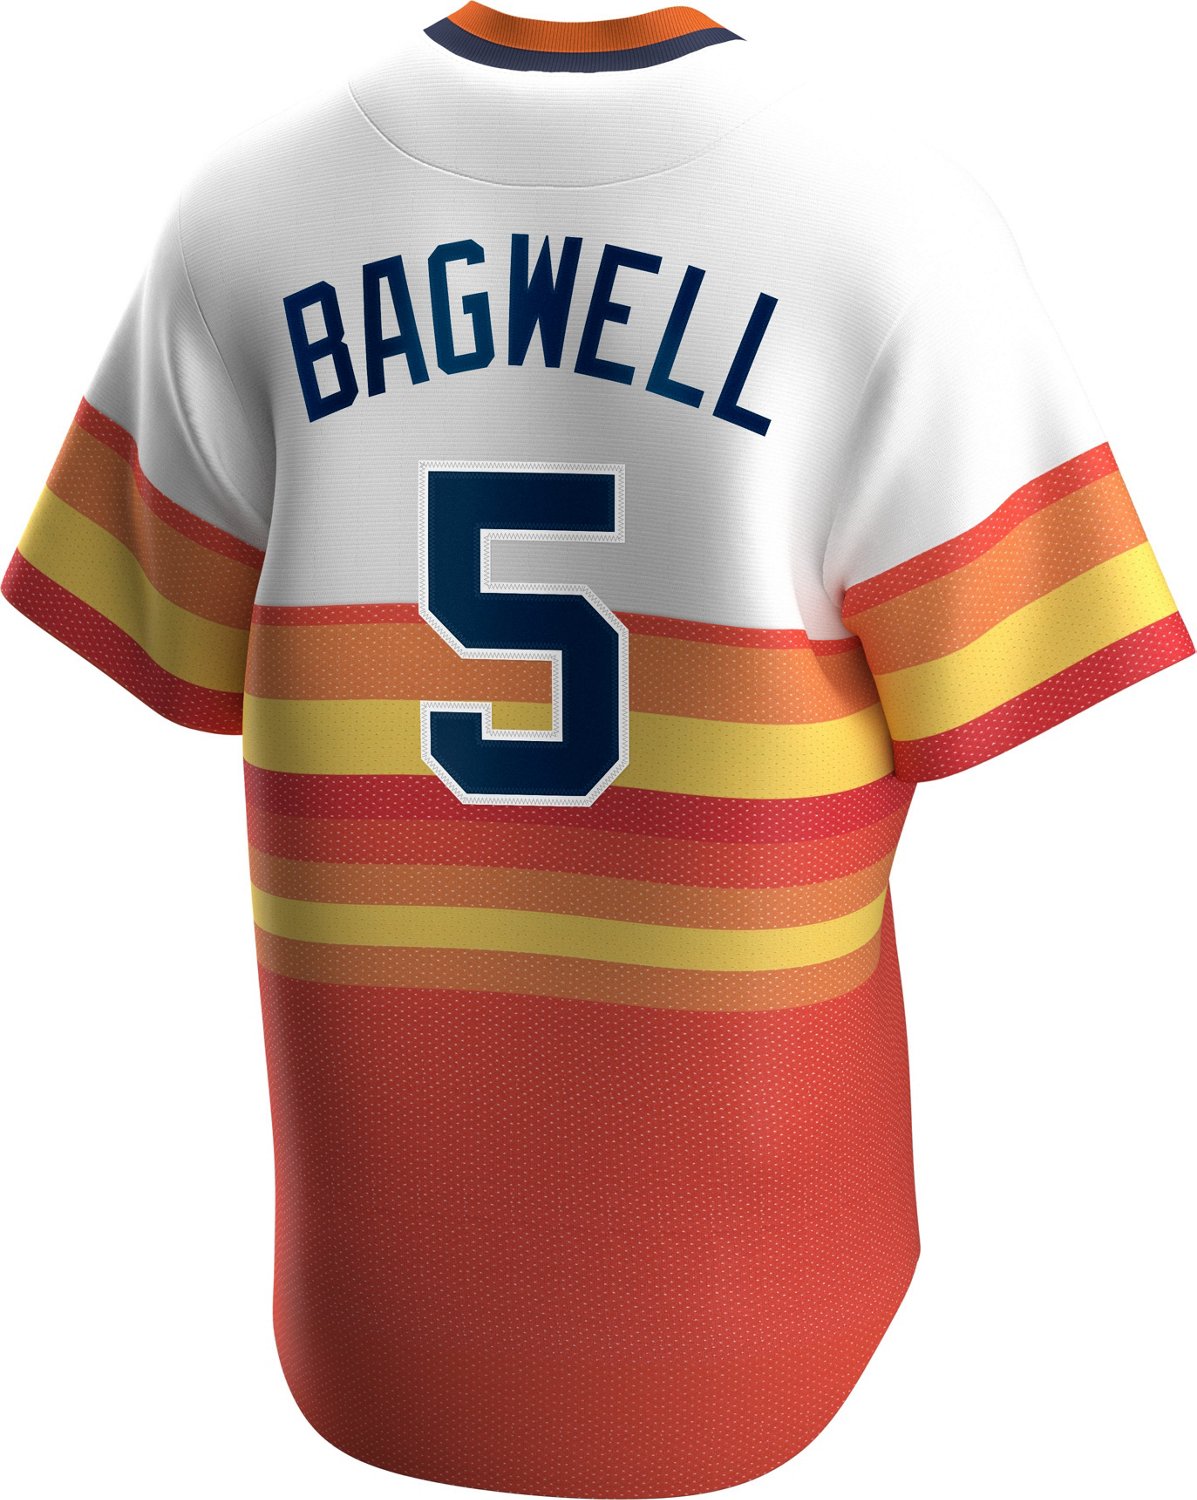 Nike Men's Bagwell Houston Astros Official Player Cooperstown Jersey